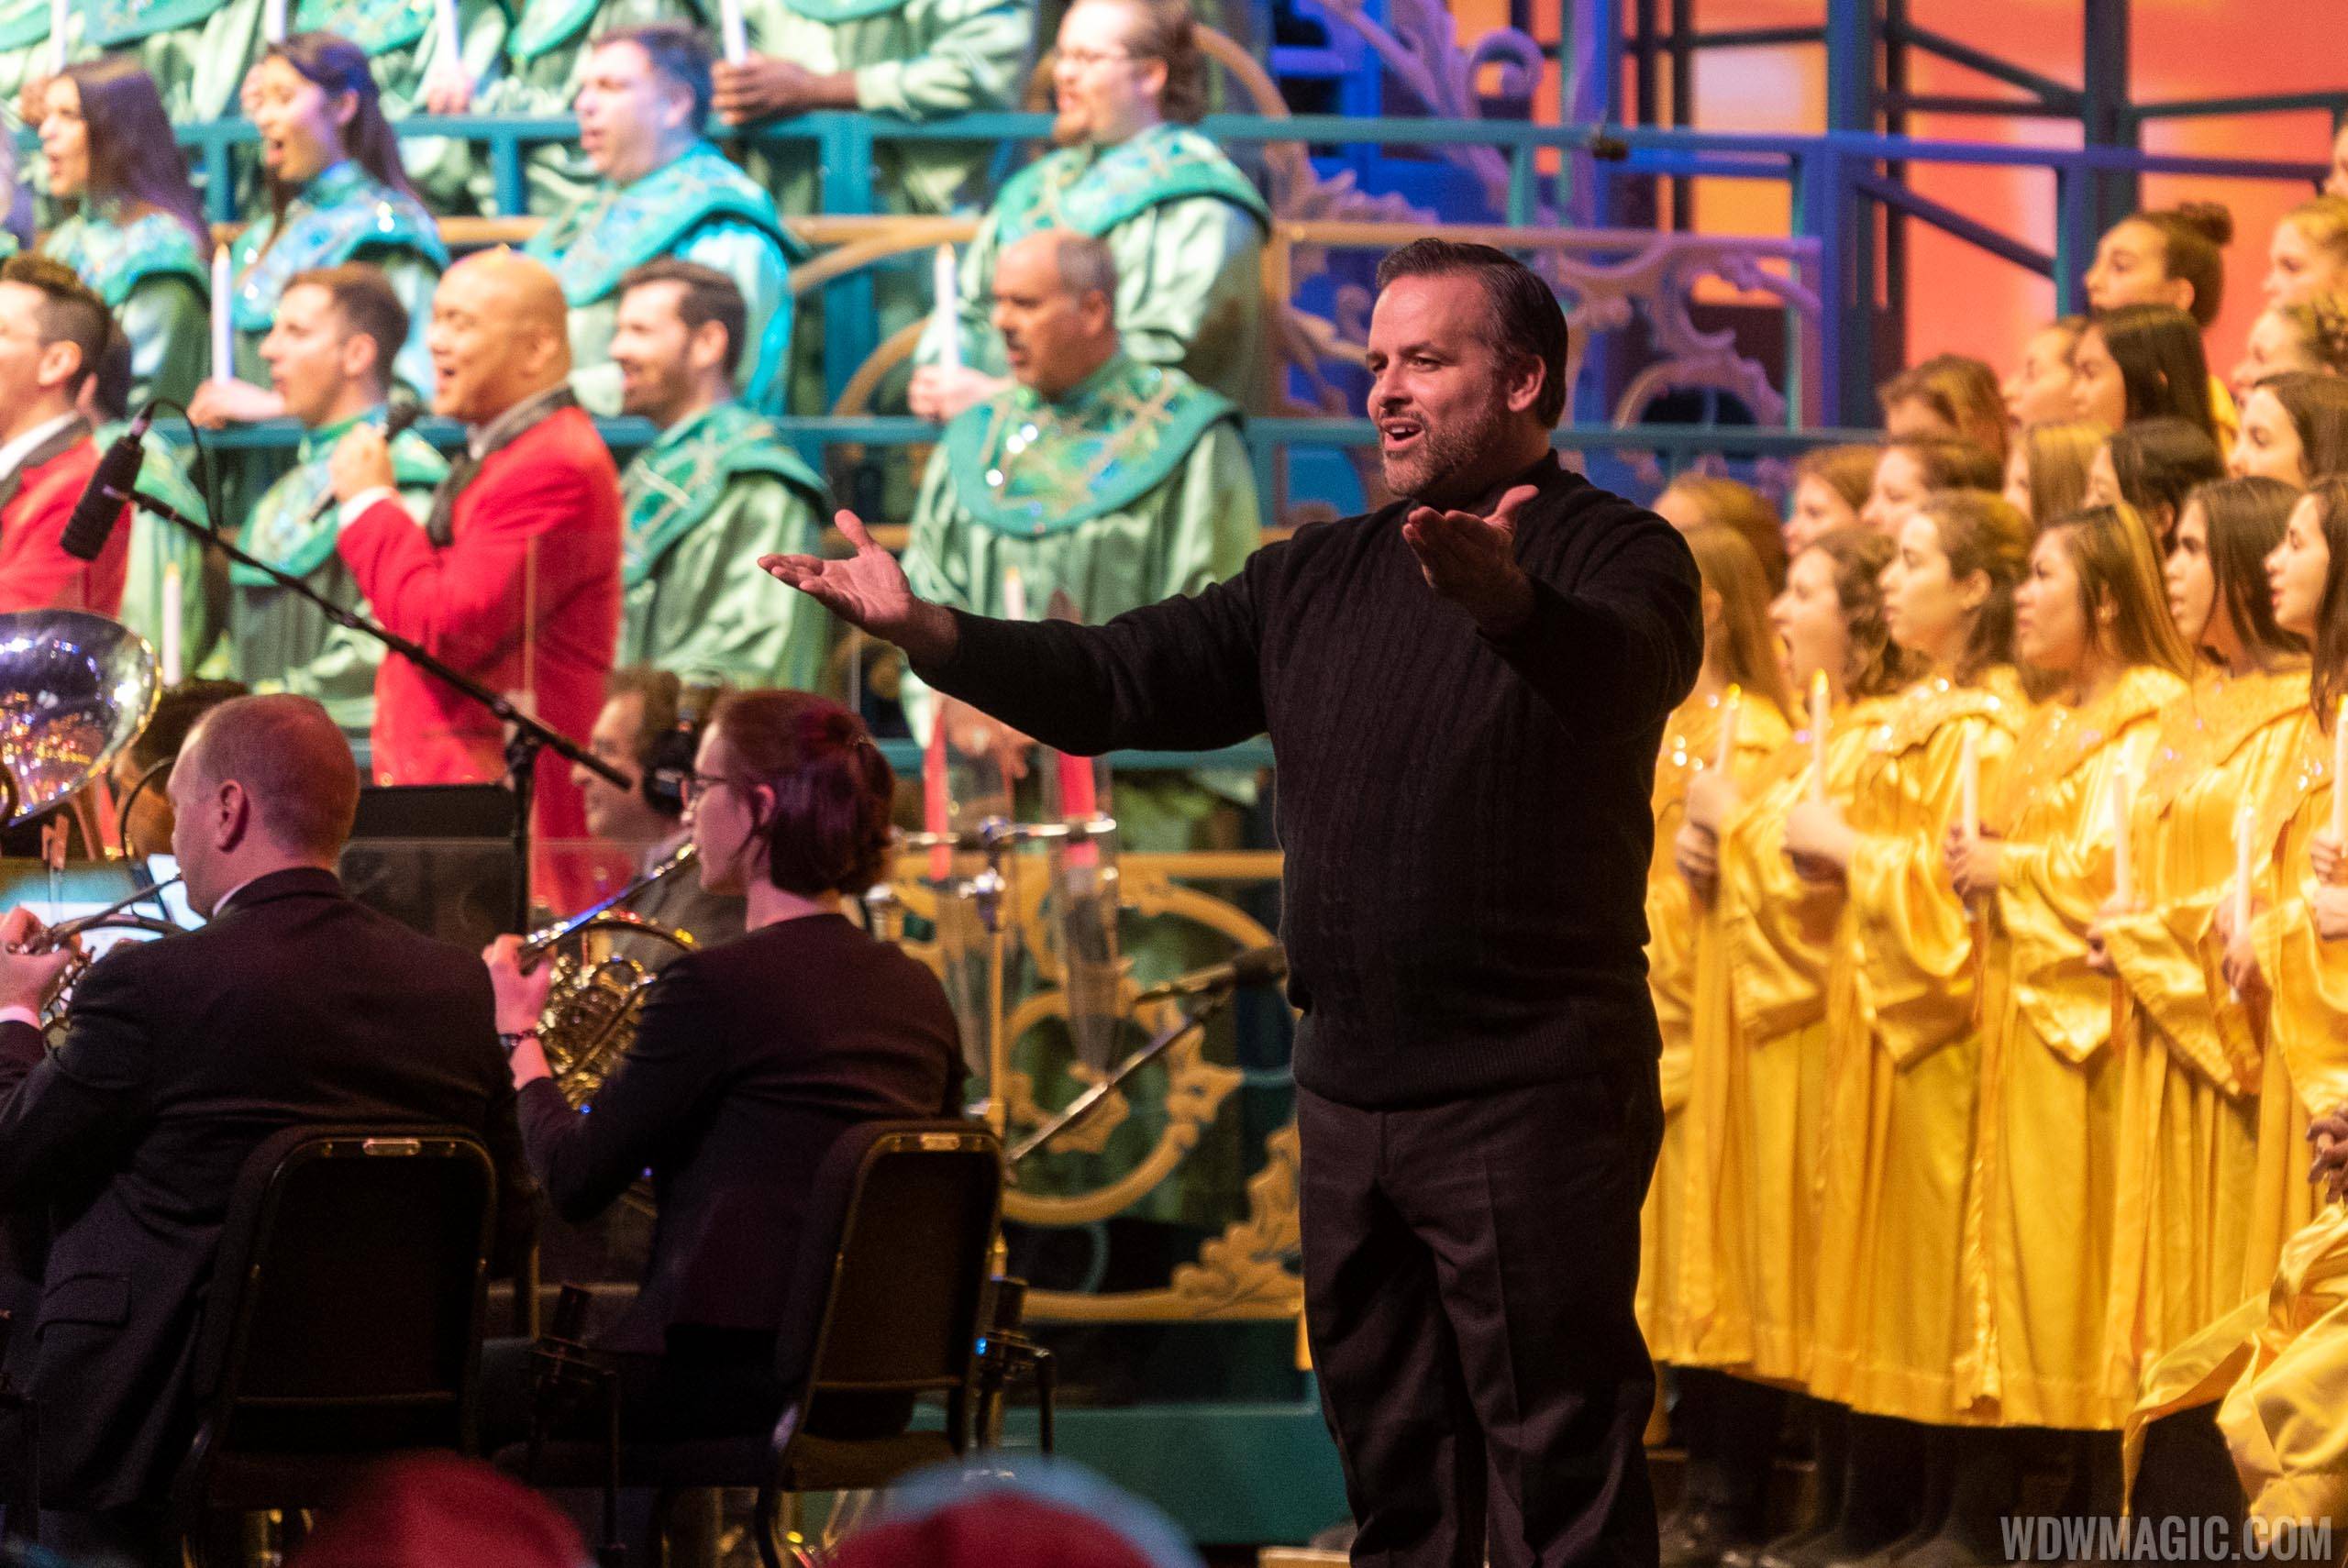 Ming-Na Wen Candlelight Processional 2019